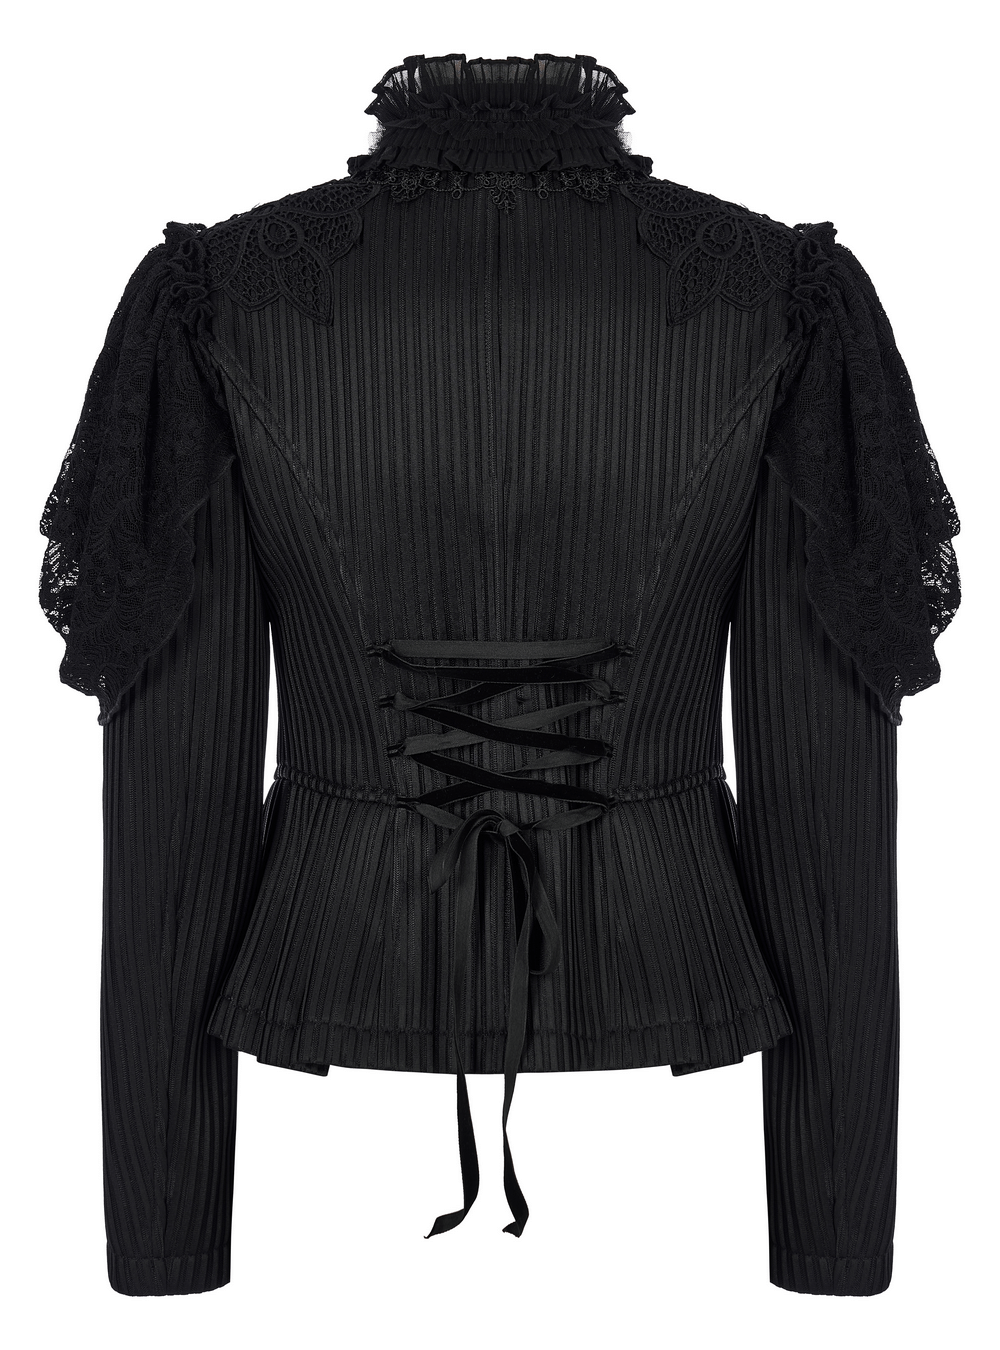 Victorian Inspired Lace Trimmed Pinstripe Tailcoat - HARD'N'HEAVY